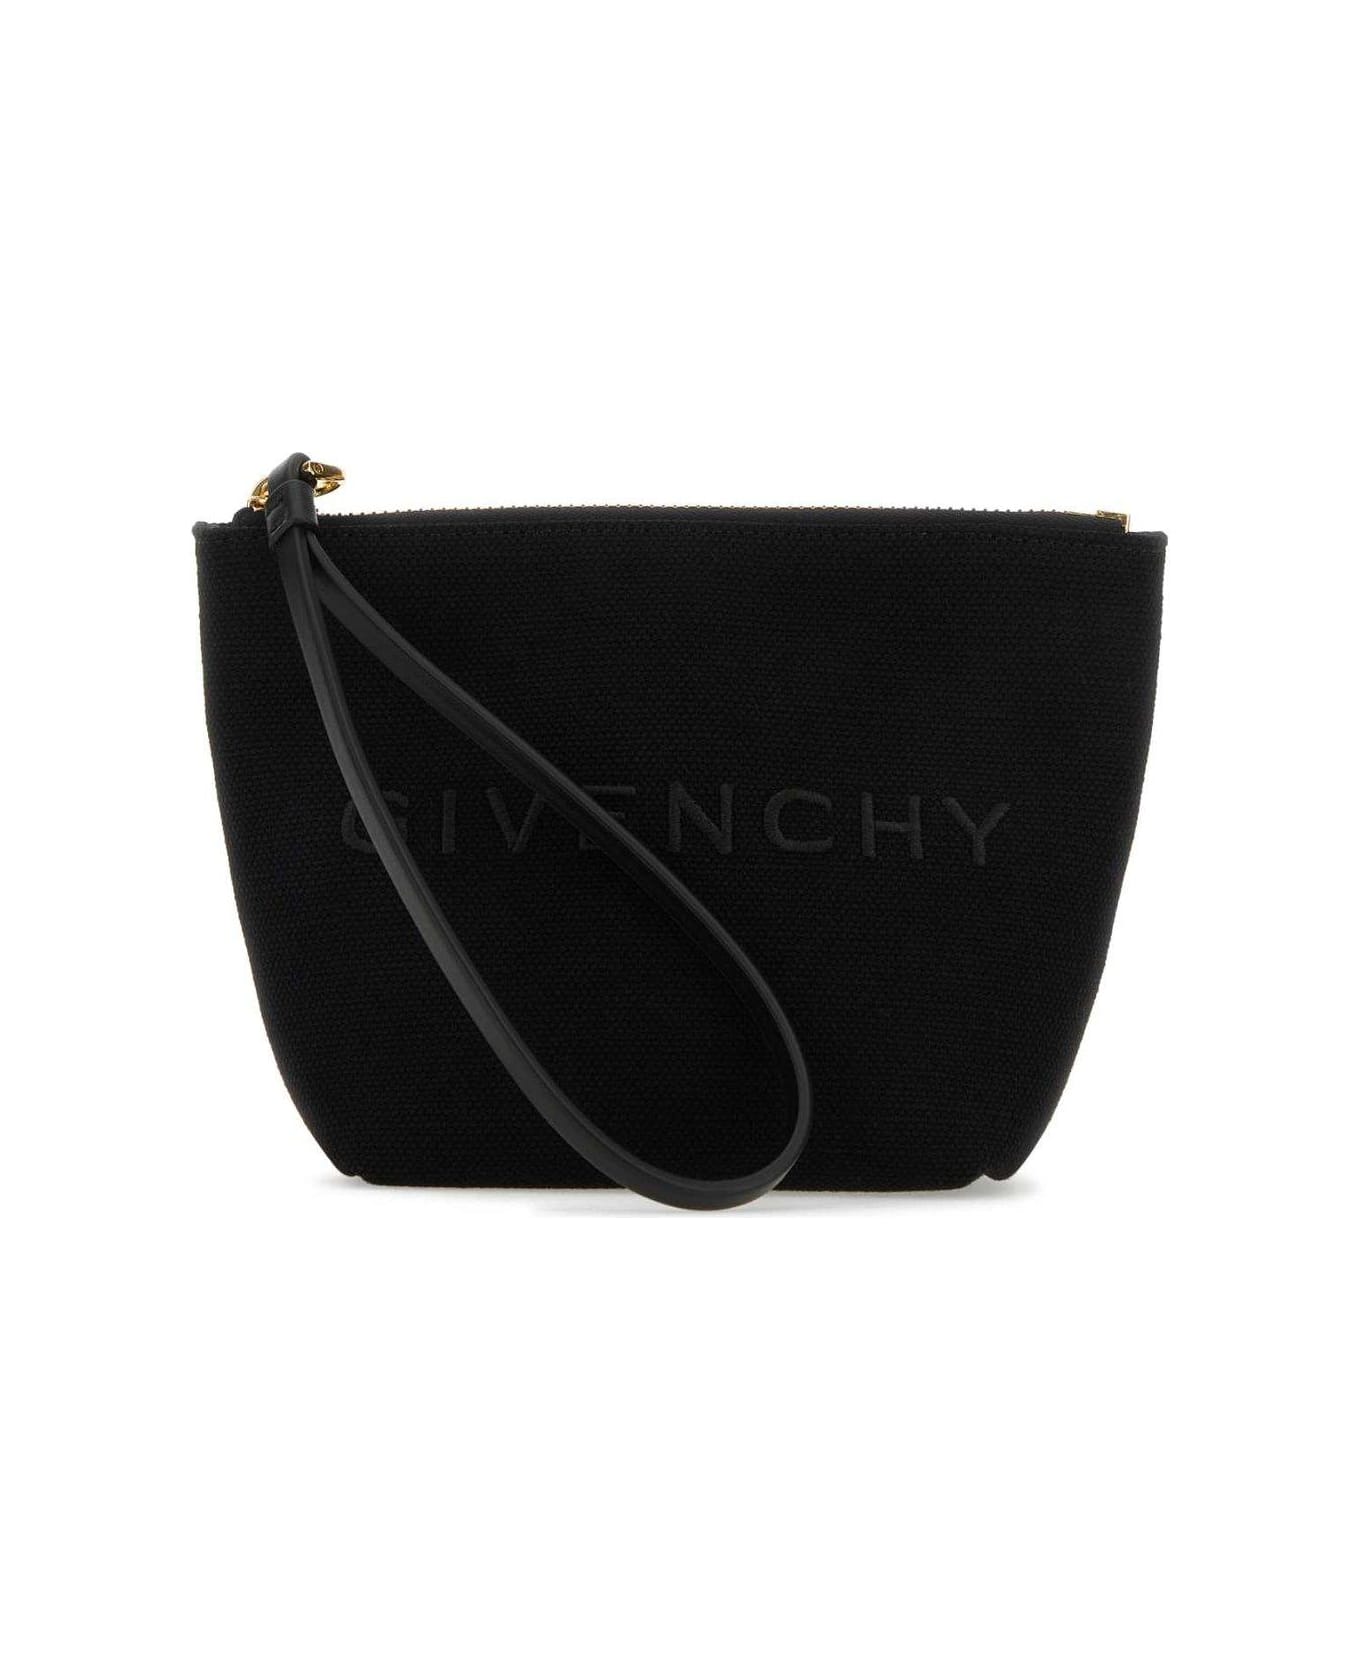 Givenchy Logo Printed Zipped Clutch Bag - Black トートバッグ